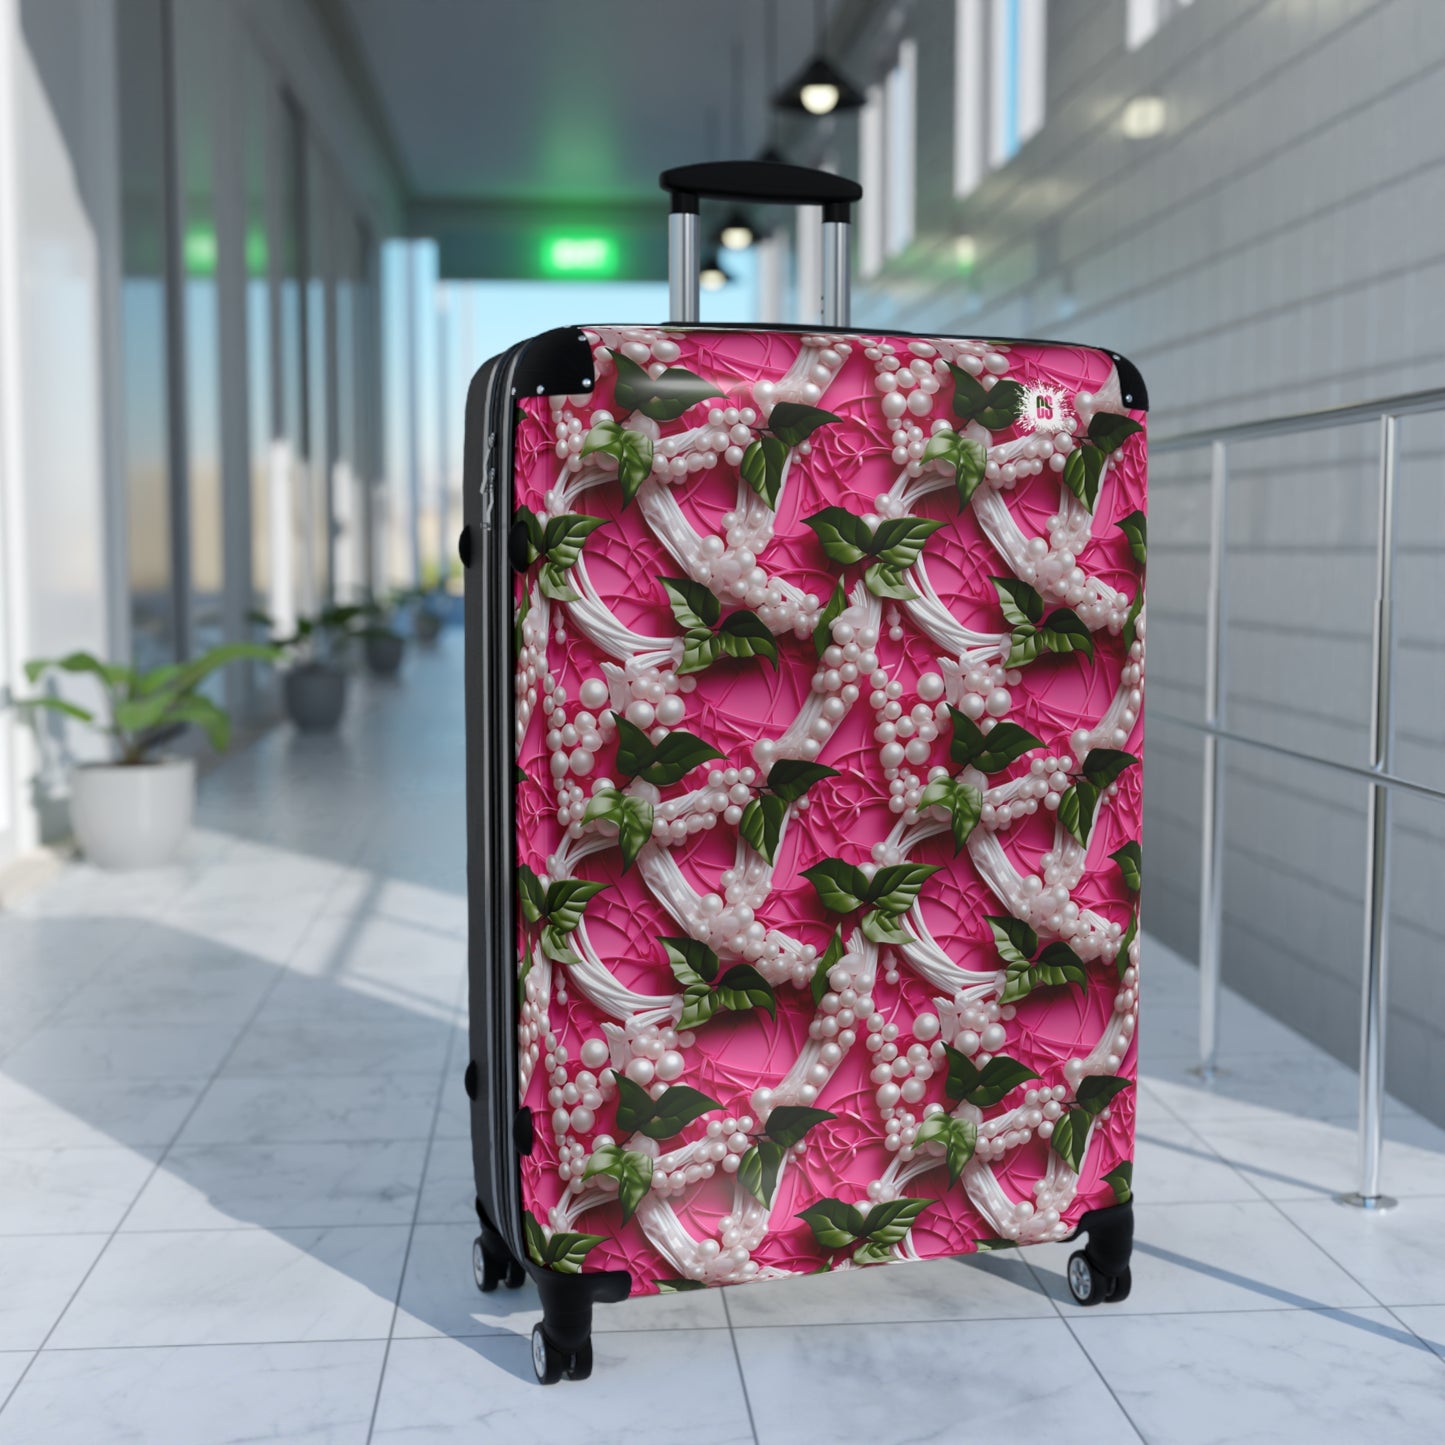 Ivy & Pearls Suitcase